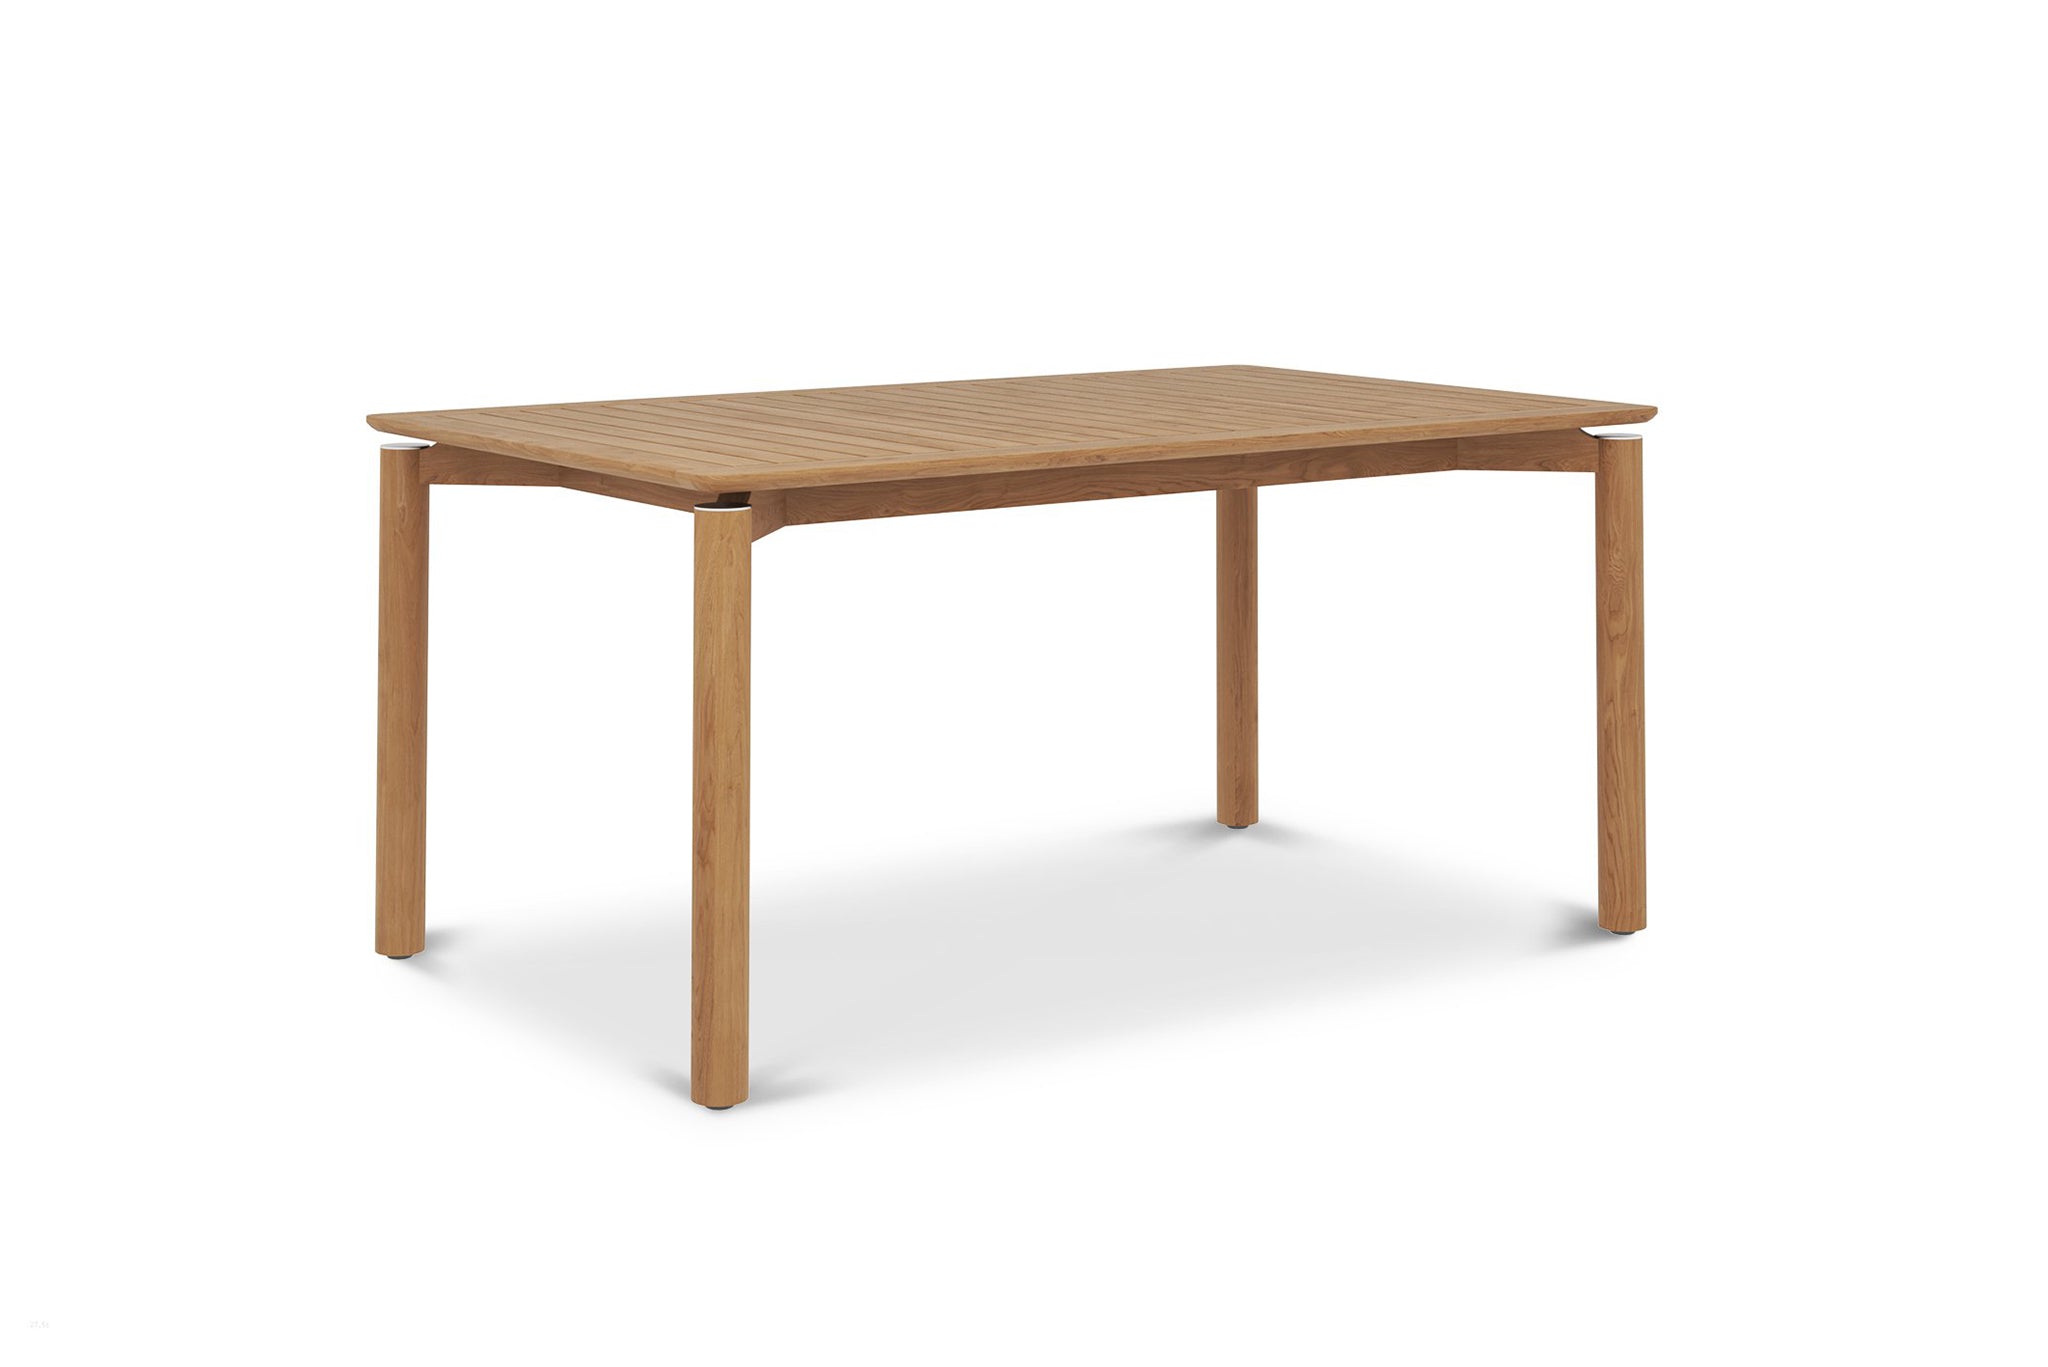 Jervis Bay Teak Outdoor Dining Table – 1.6m